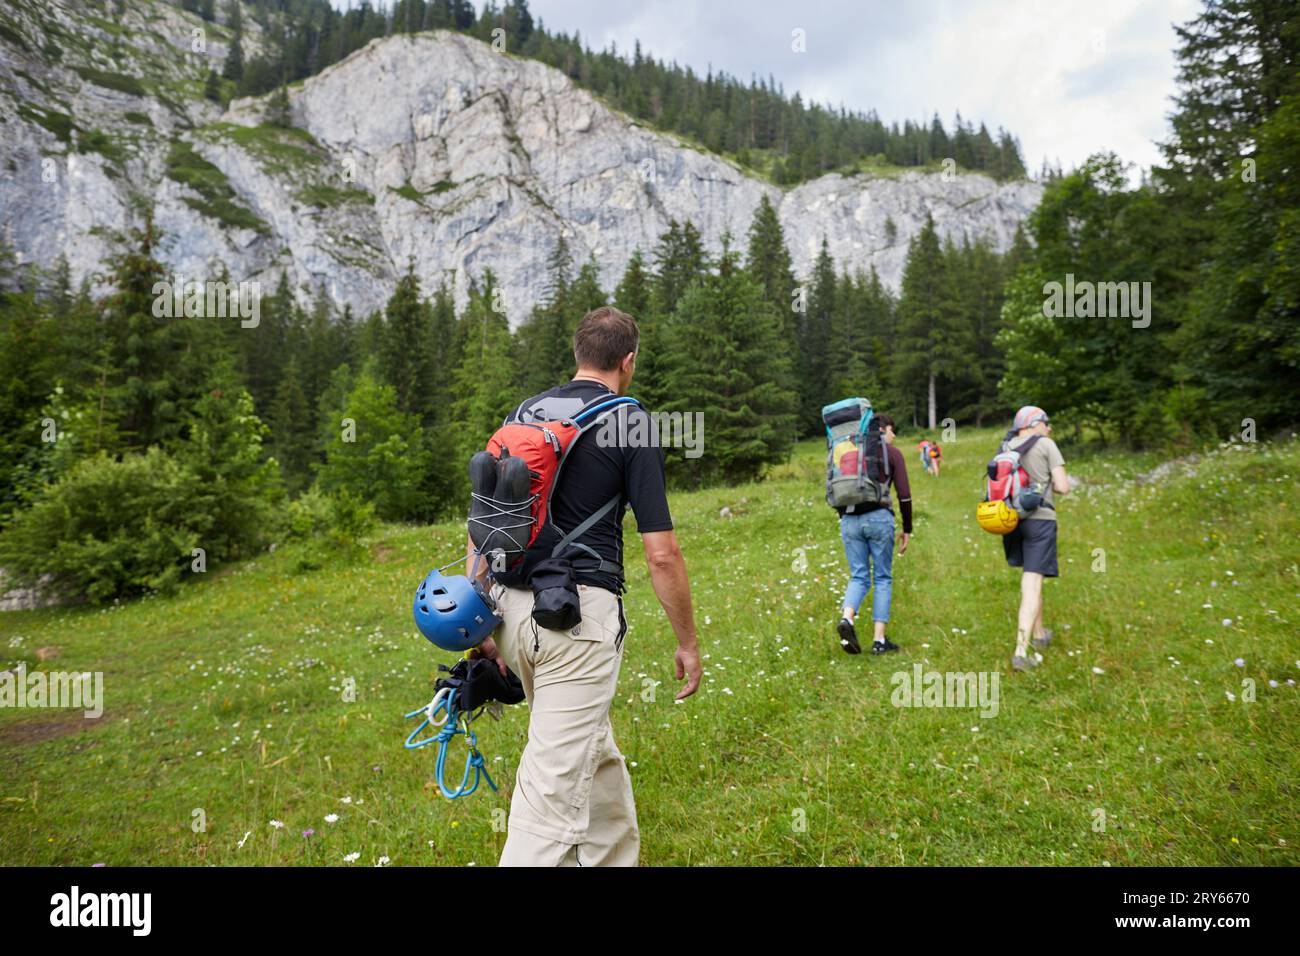 Group of people starting a hike in the mountains Stock Photo